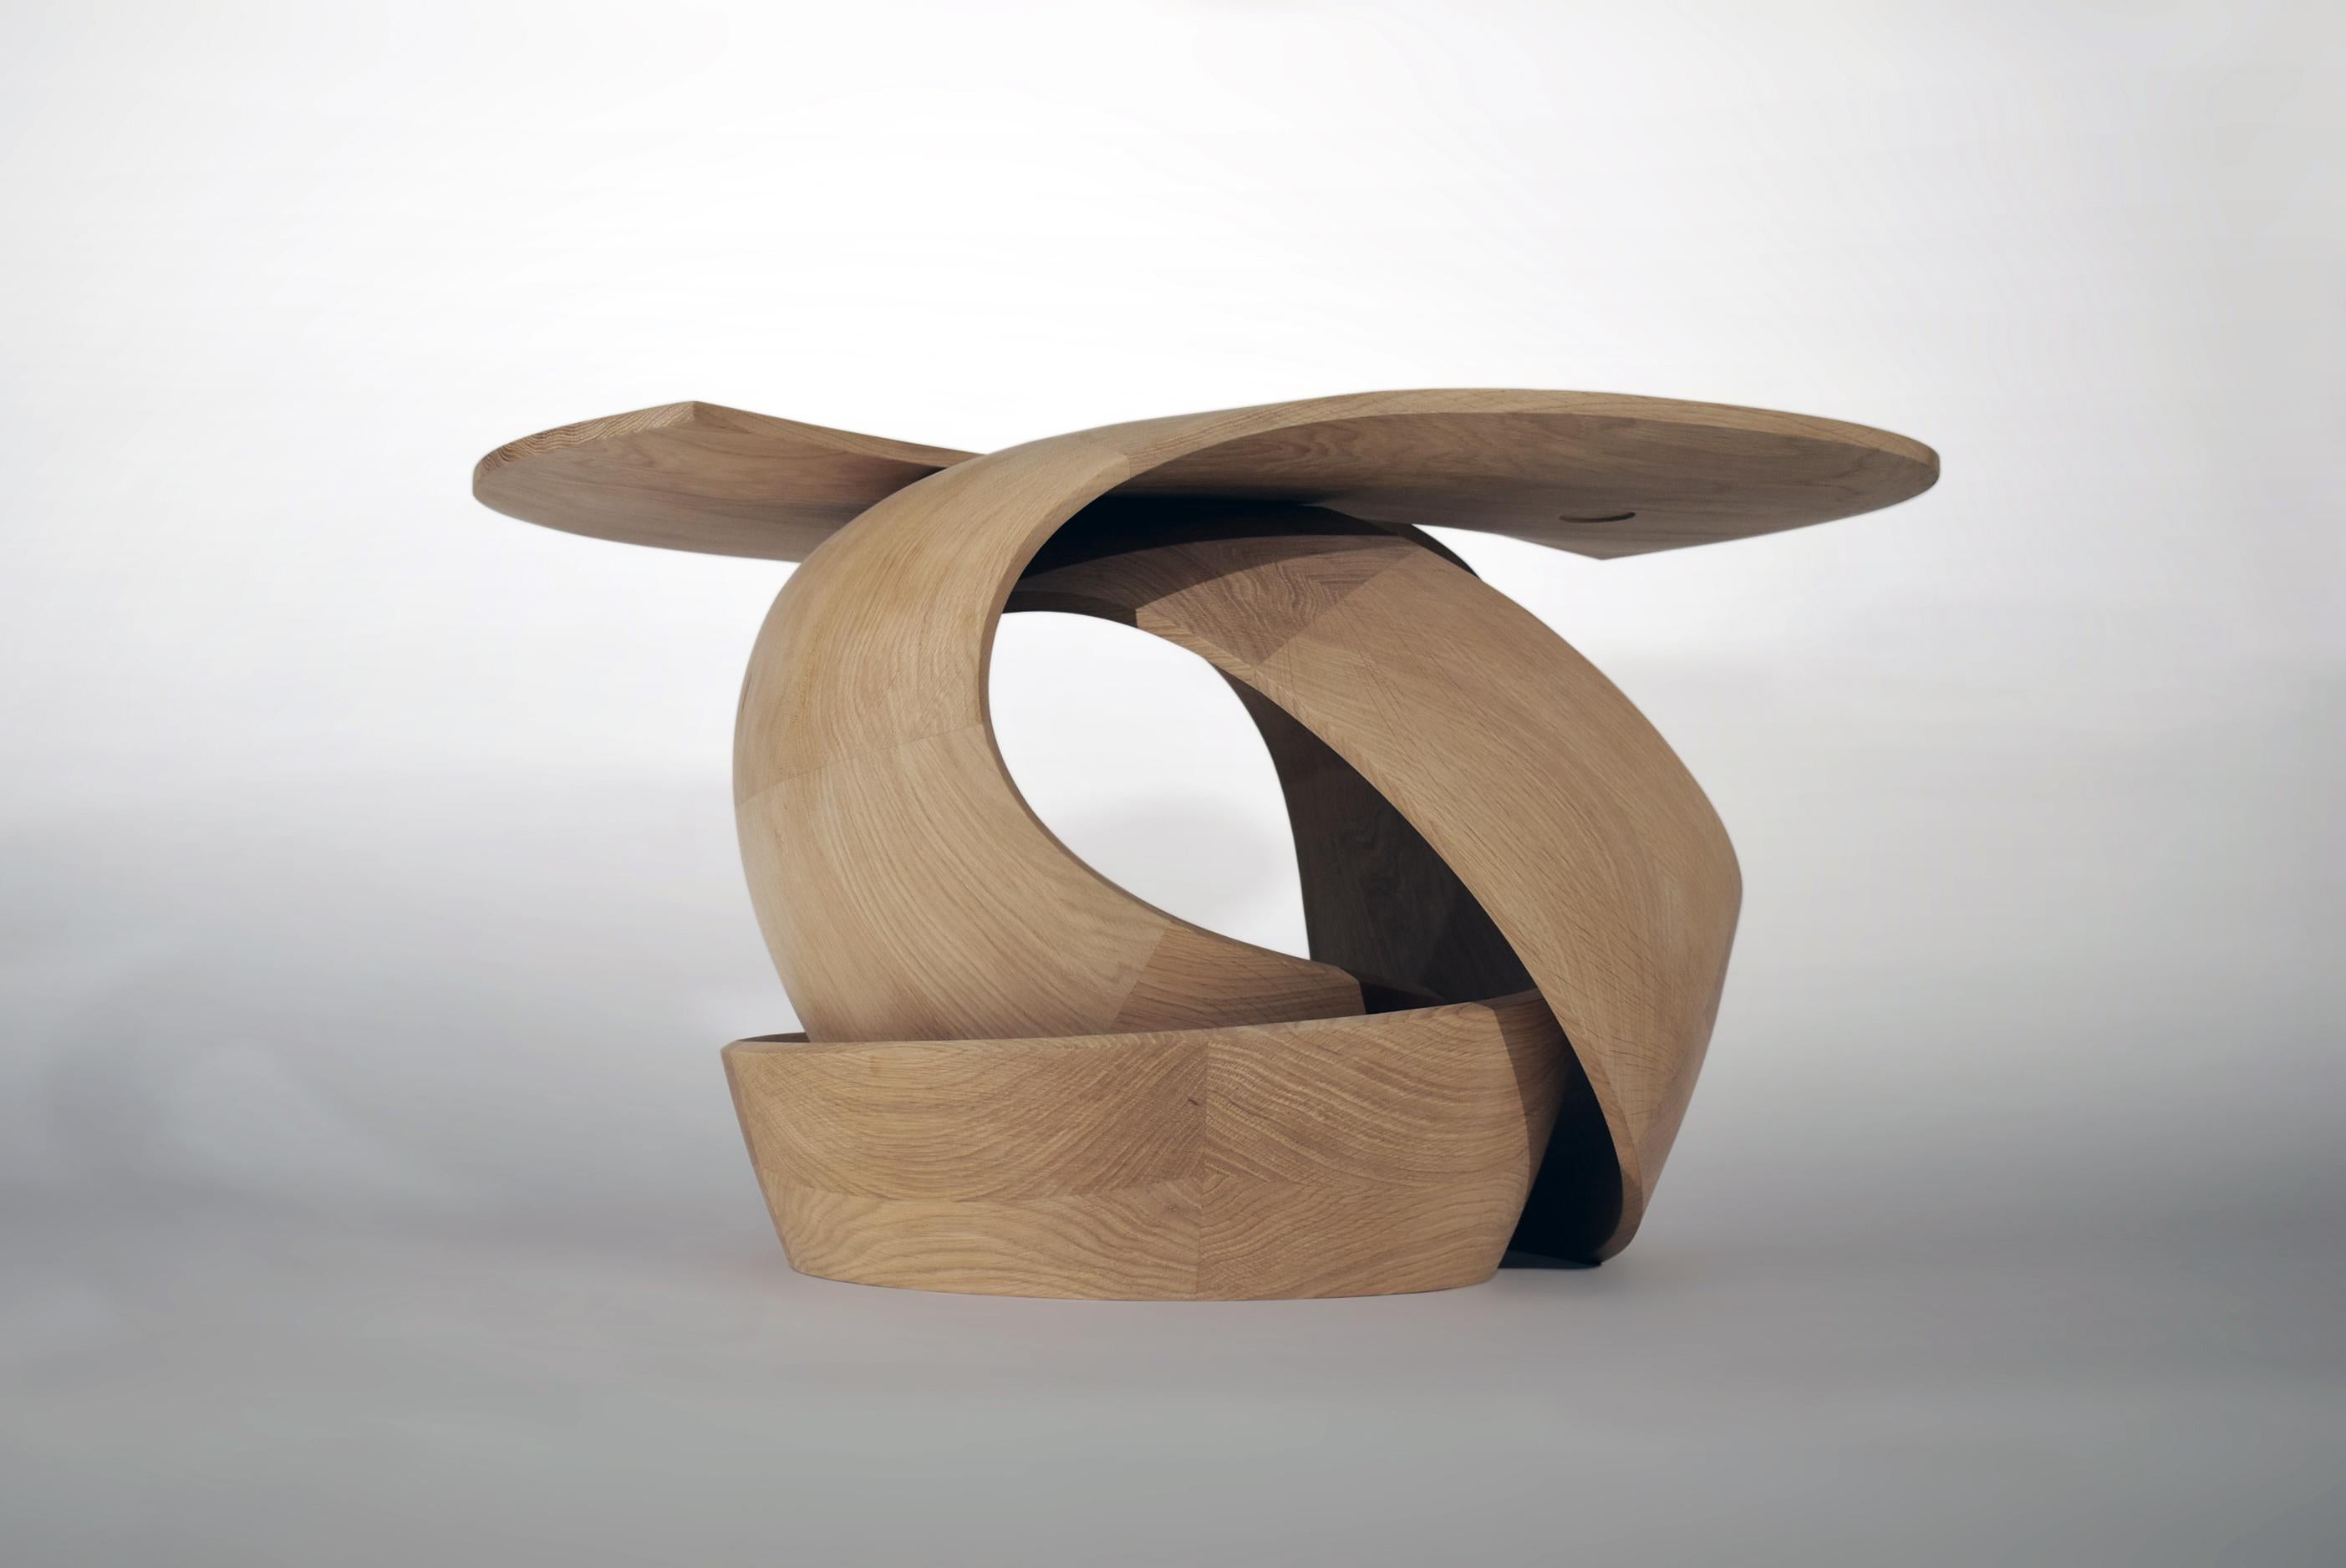 The 'Tula' side table by British designer-maker, Tom Vaughan, is part of a series of work tracing three-dimensional paths of movement through a solid, functional form, in which the artist pushes both material and process to its limit. Made in fumed